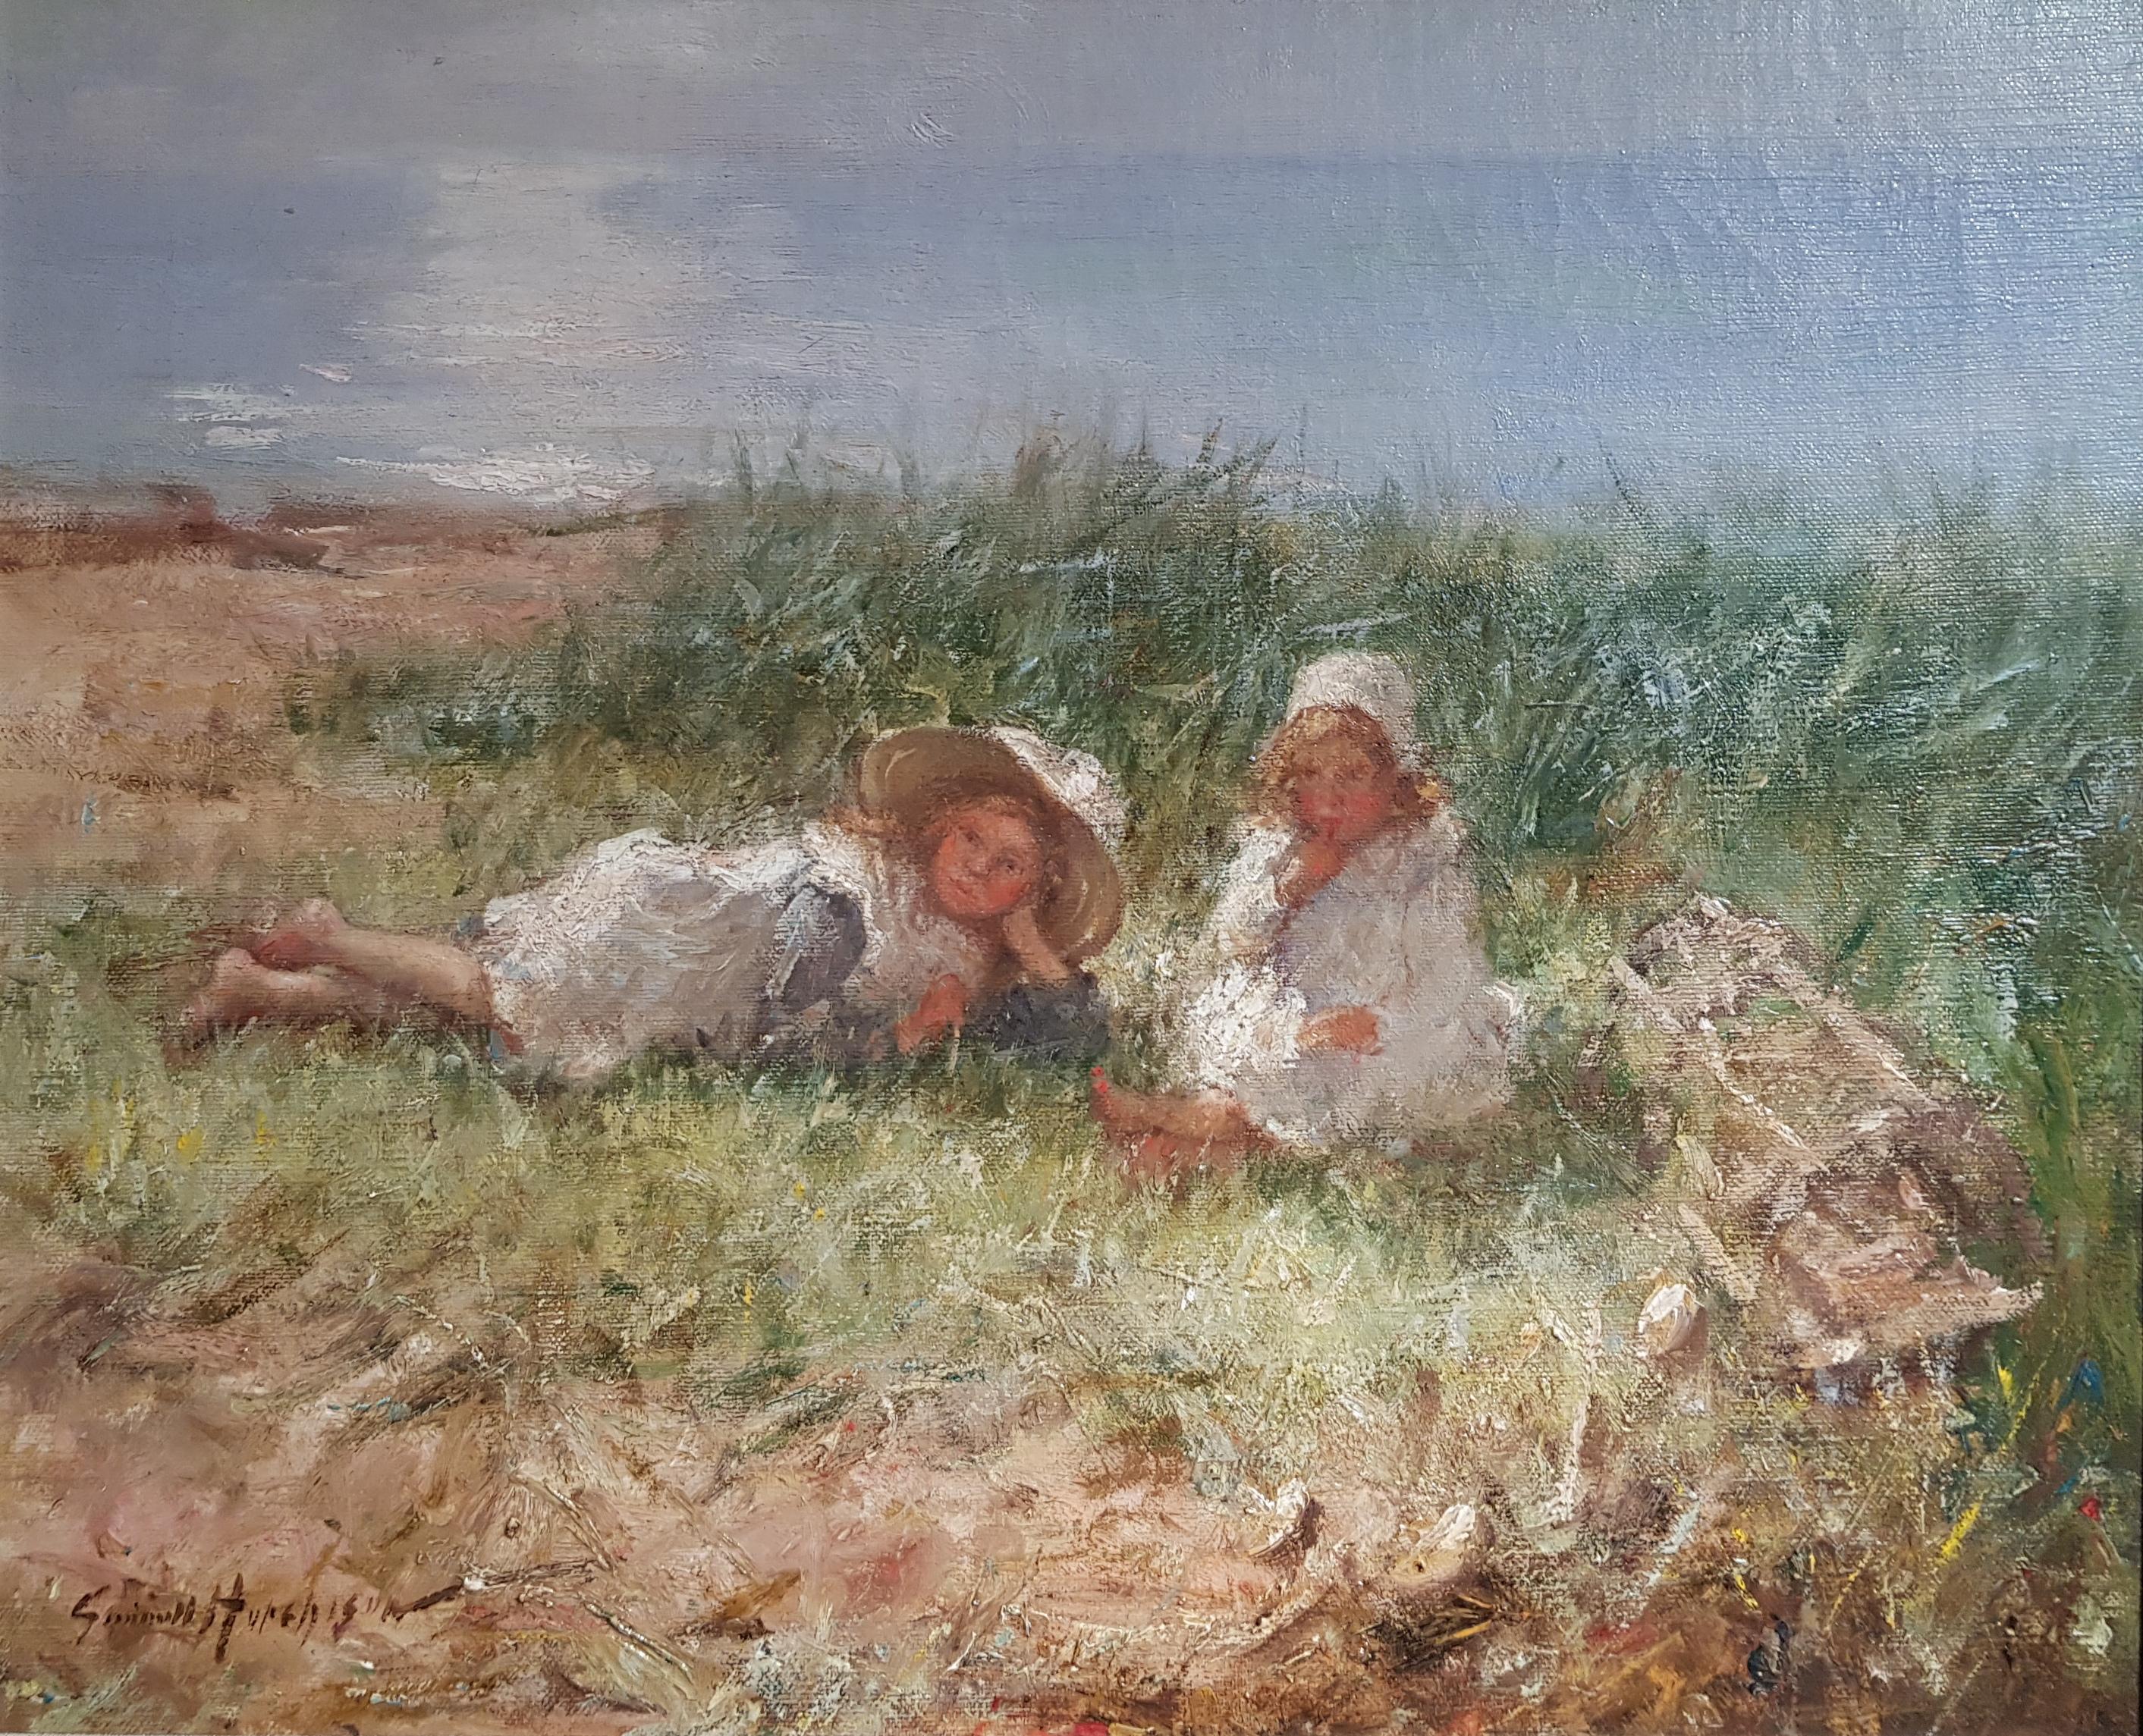 ‘Between Us’ is an Impressionist Figurative painting by Robert Gemmell Hutchison R.S.A. It is highly evocative of the Scottish Coast, a hopeful and optimistic oil painting.

Hutchinson was born in Edinburgh in 1855 the first son of a brass-founder.